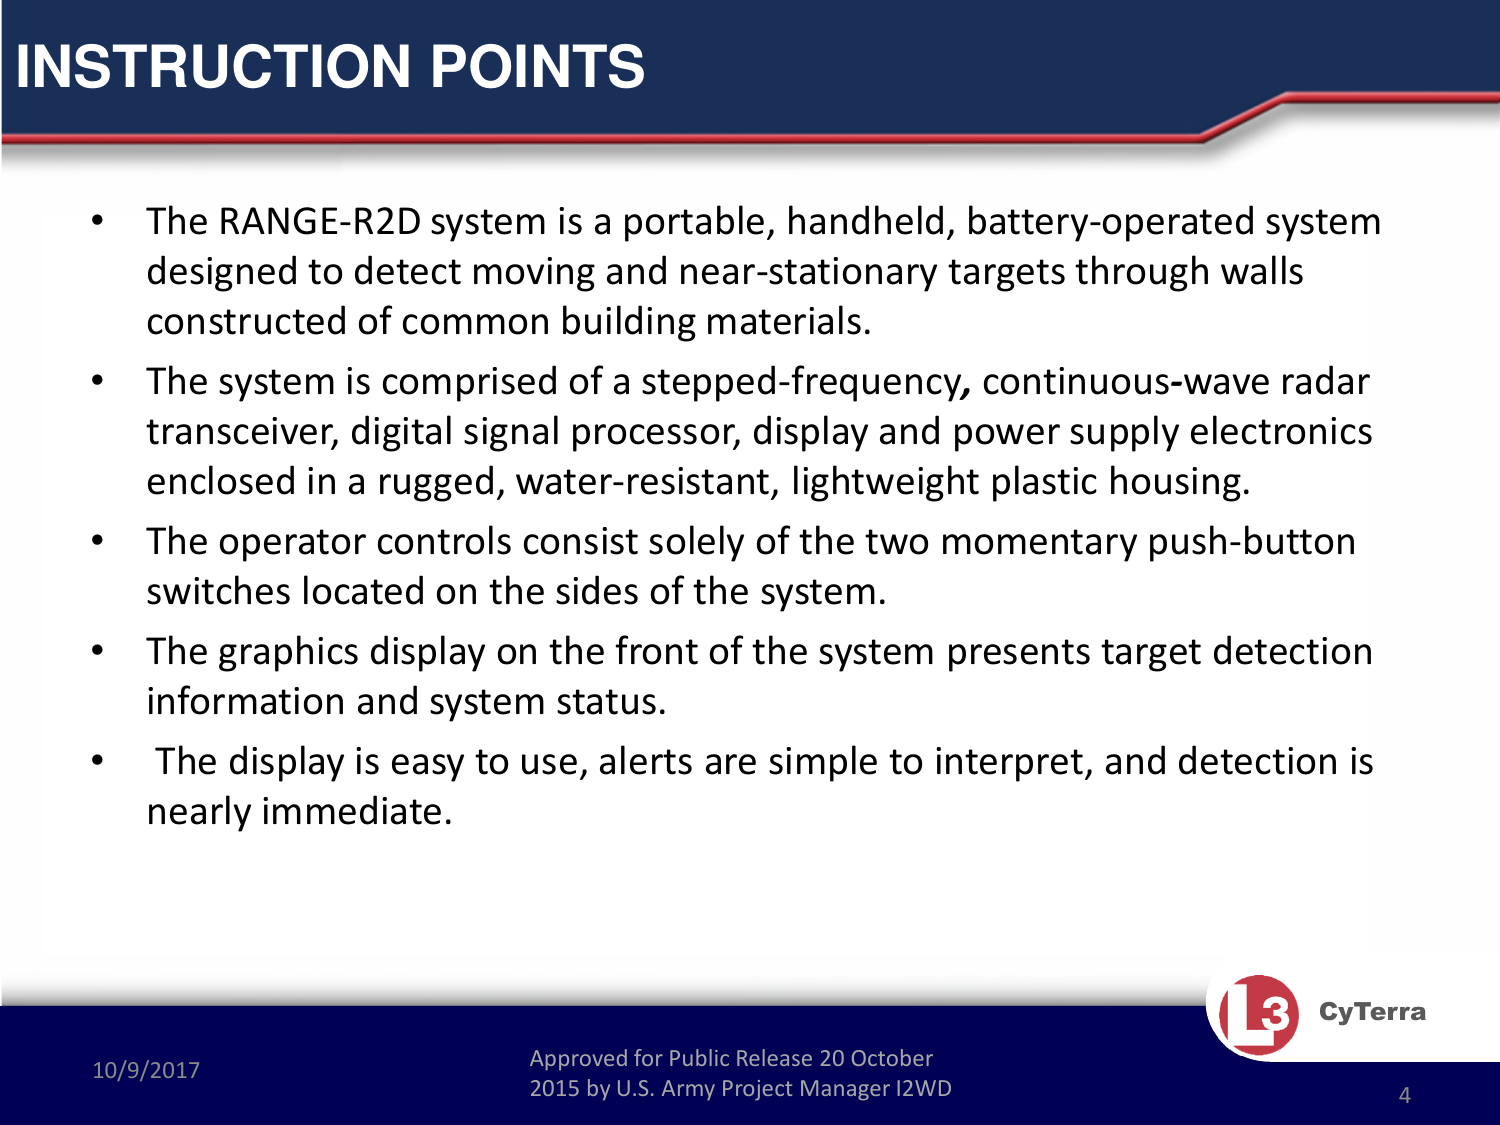 Approved for Public Release 20 October 2015 by U.S. Army Project Manager I2WD10/9/2017 Approved for Public Release 20 October 2015 by U.S. Army Project Manager I2WD 4CyTerraINSTRUCTION POINTS•The RANGE-R2D system is a portable, handheld, battery-operated systemdesigned to detect moving and near-stationary targets through walls constructed of common building materials. •The system is comprised of a stepped-frequency,continuous-wave radar transceiver, digital signal processor, display and power supply electronics enclosed in a rugged, water-resistant, lightweight plastic housing.  •The operator controls consist solely of the two momentary push-button switches located on the sides of the system.  •The graphics display on the front of the system presents target detection information and system status. •The display is easy to use, alerts are simple to interpret, and detection is nearly immediate.